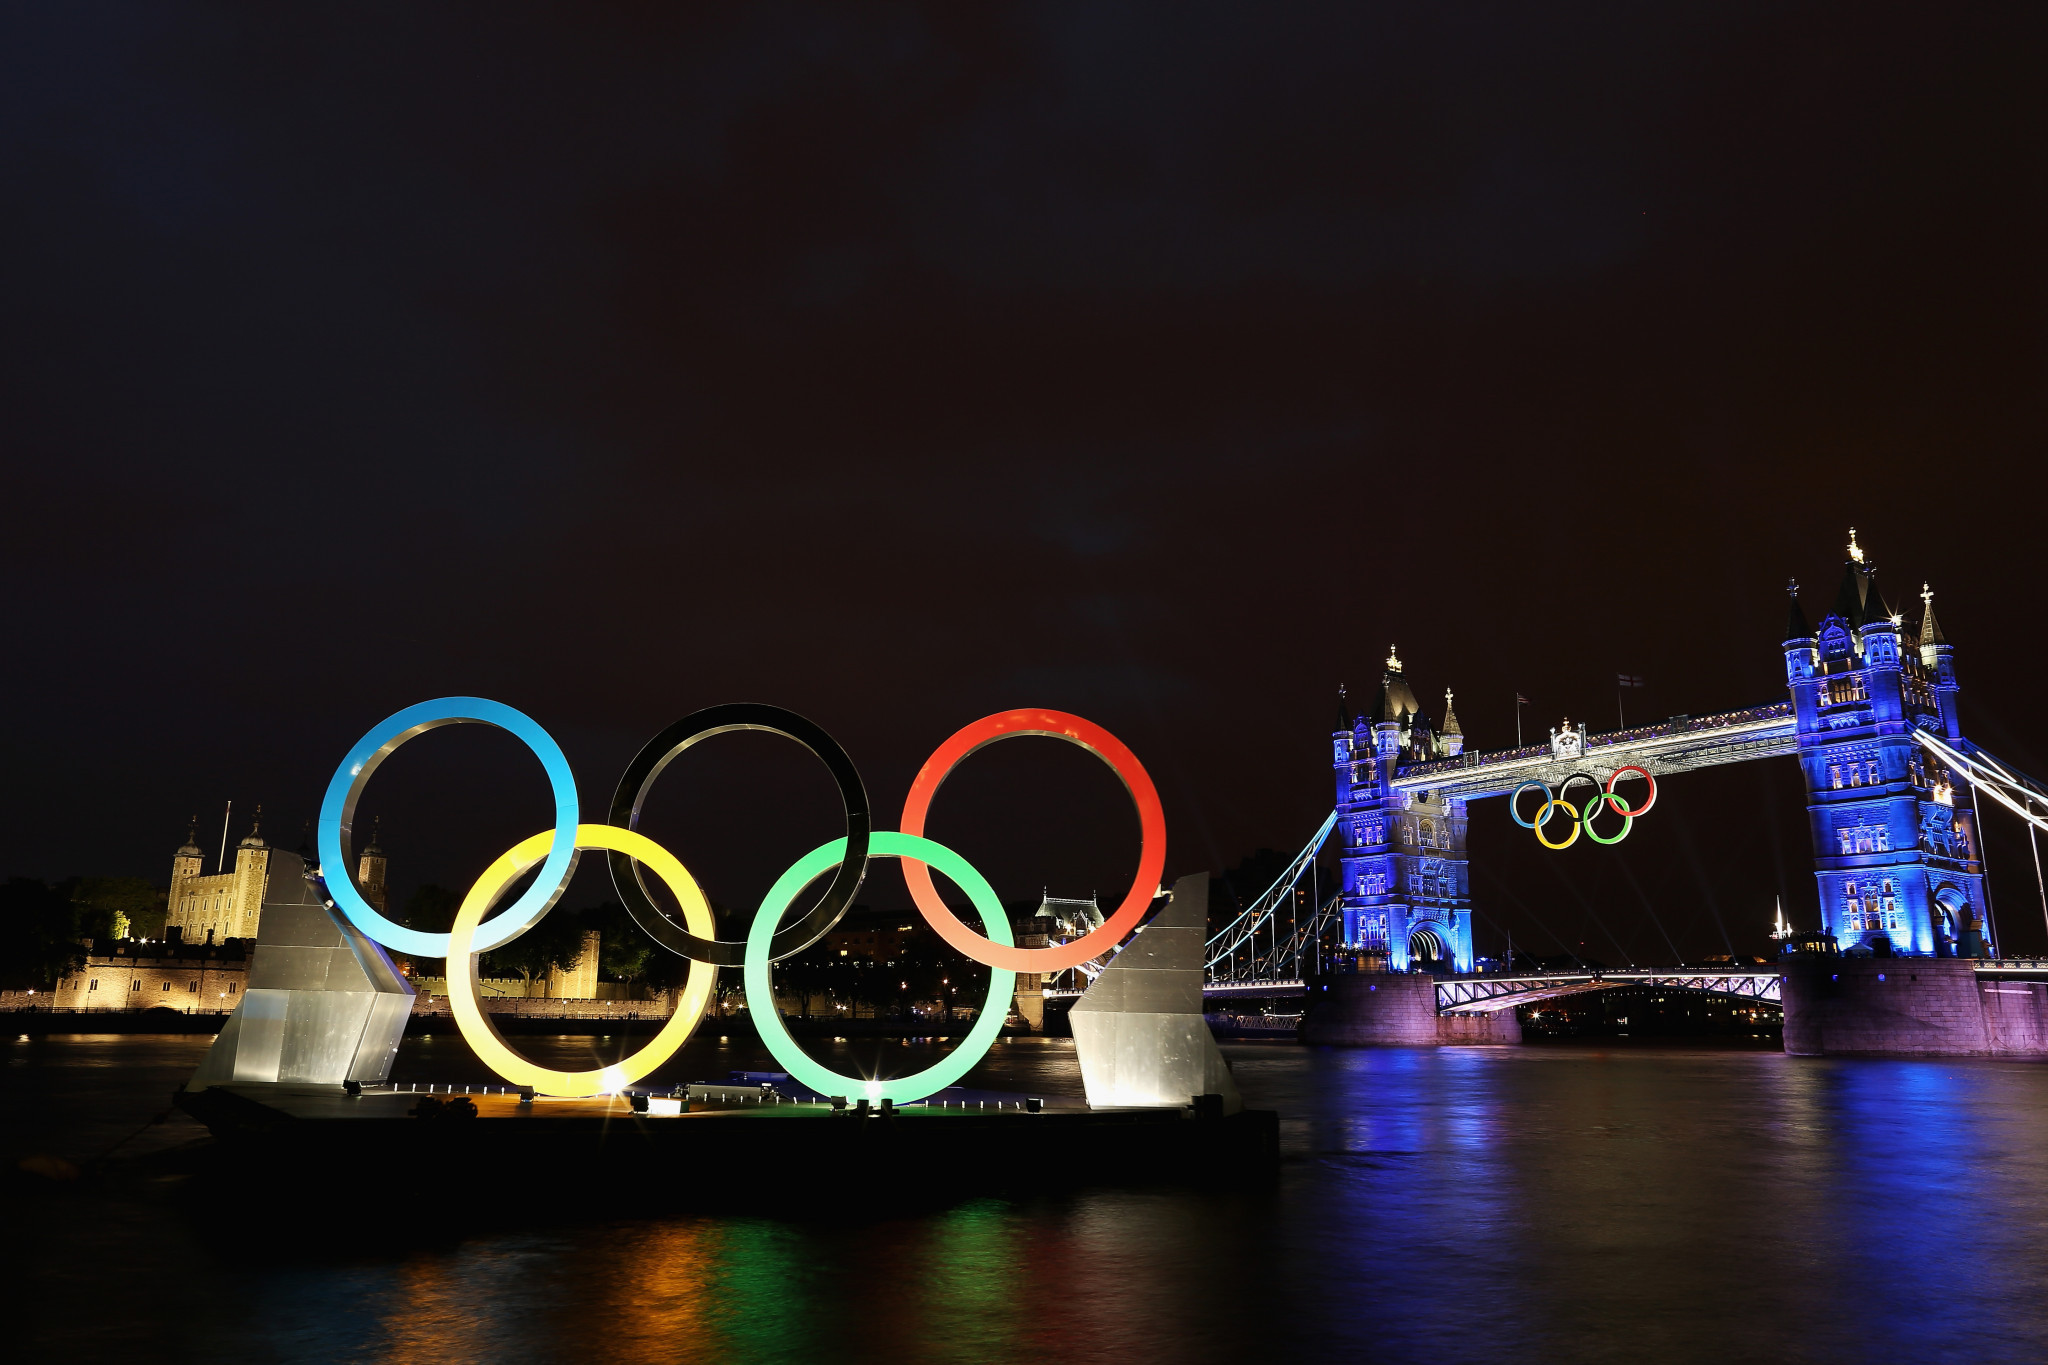 The tenth anniversary of London 2012 Olympic and Paralympic Games will be celebrated at the city’s Guildhall on July 27 ©Getty Images